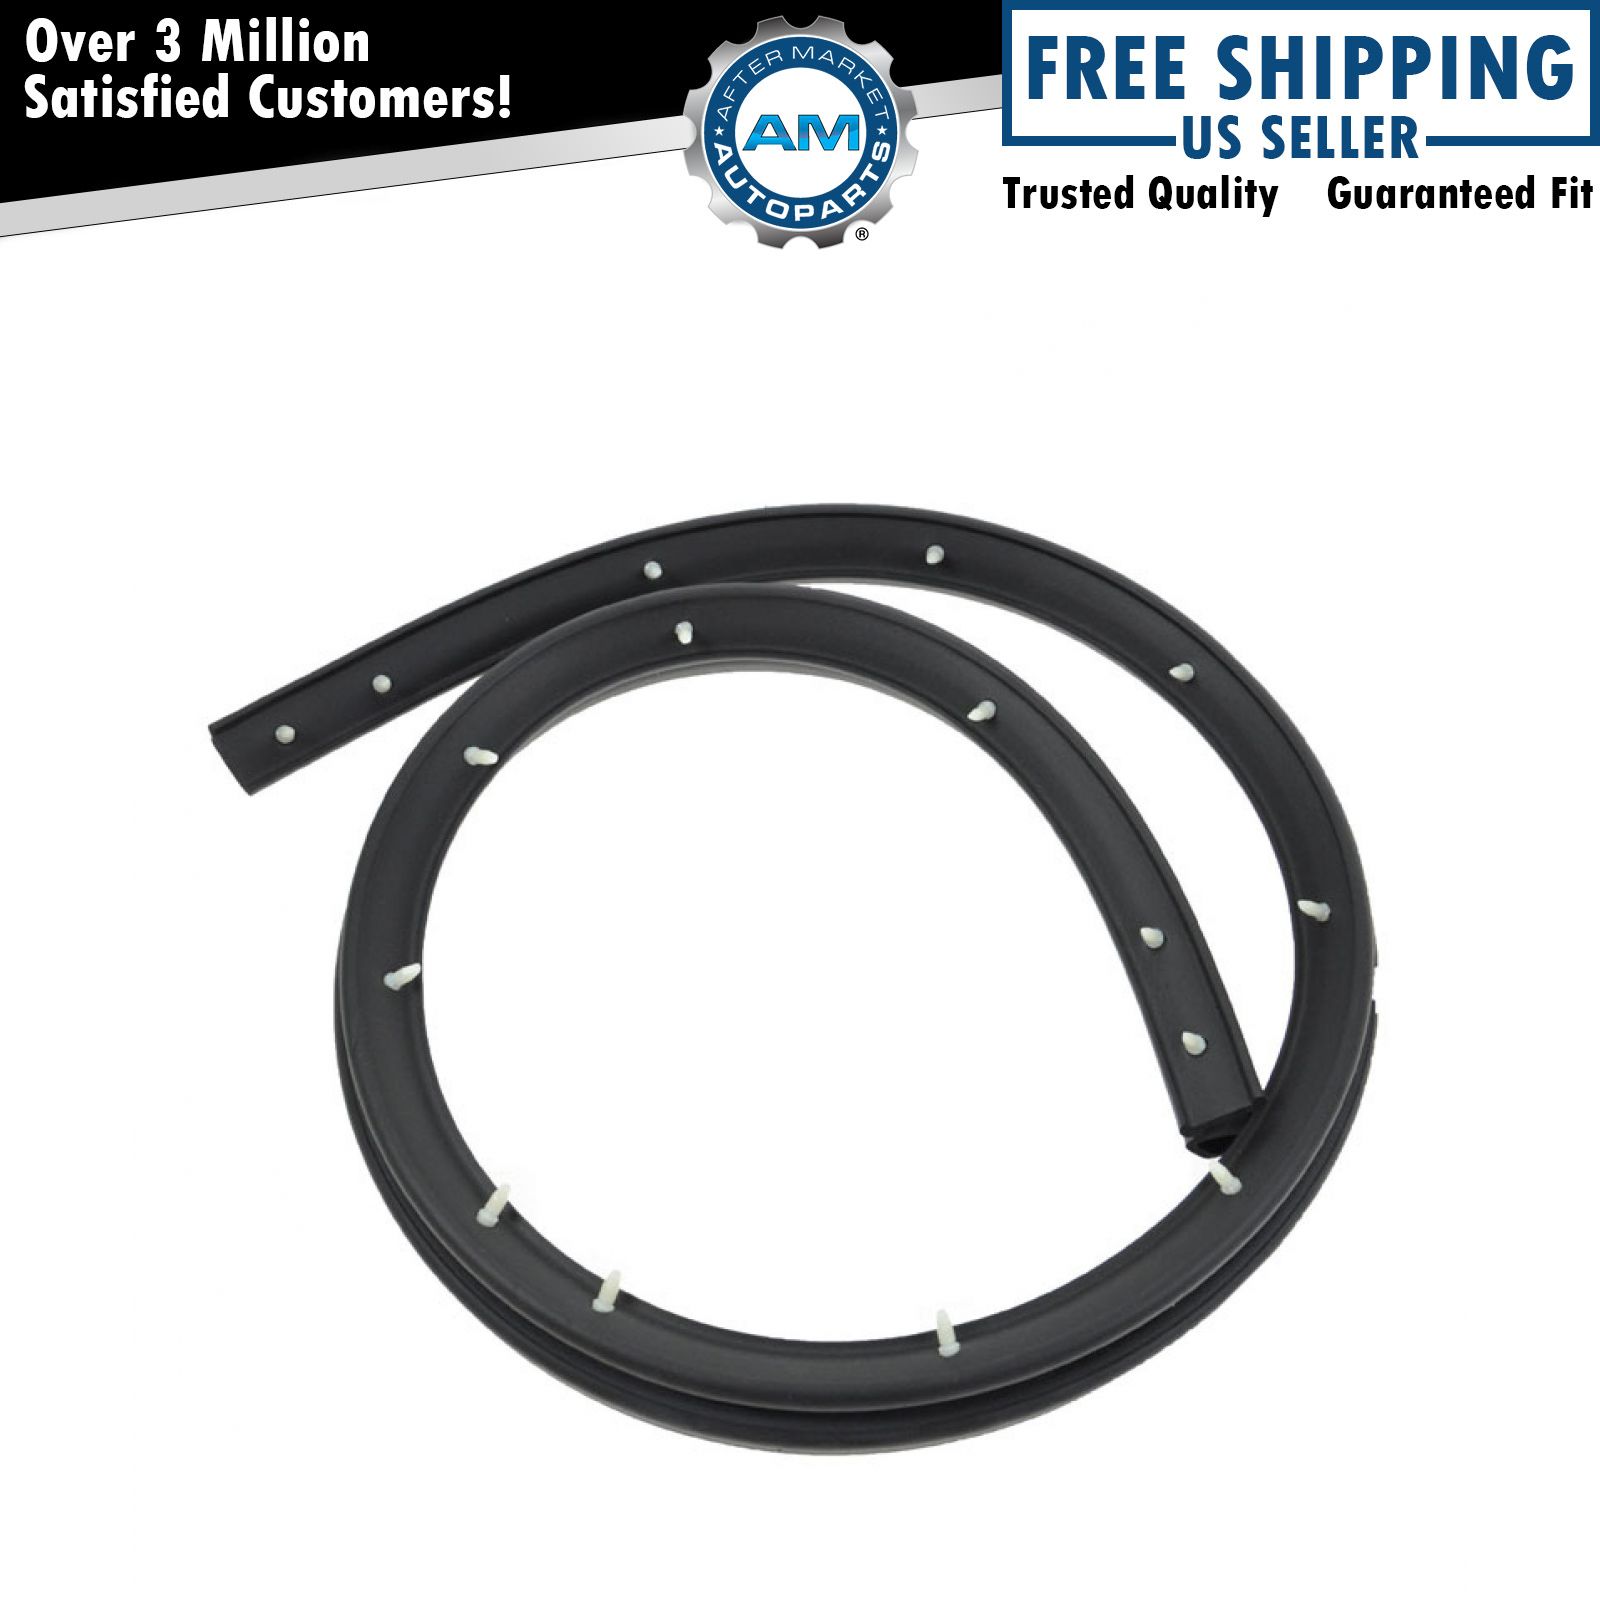 Hood to Cowl Weatherstrip Rubber Seal for 82-92 Camaro Firebird Trans Am